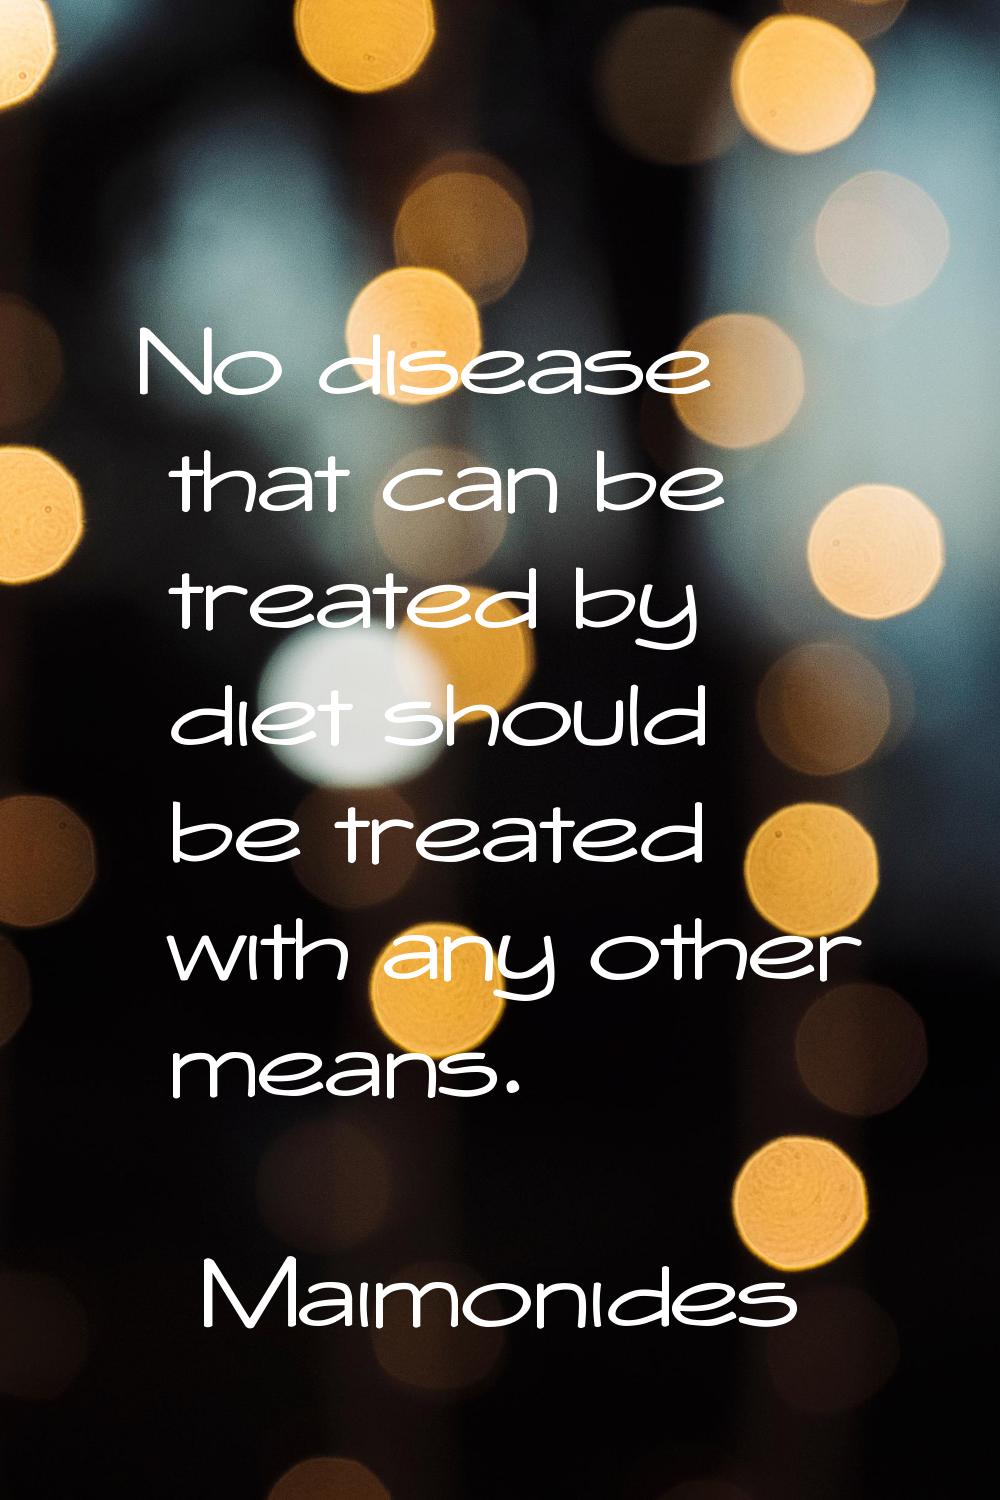 No disease that can be treated by diet should be treated with any other means.